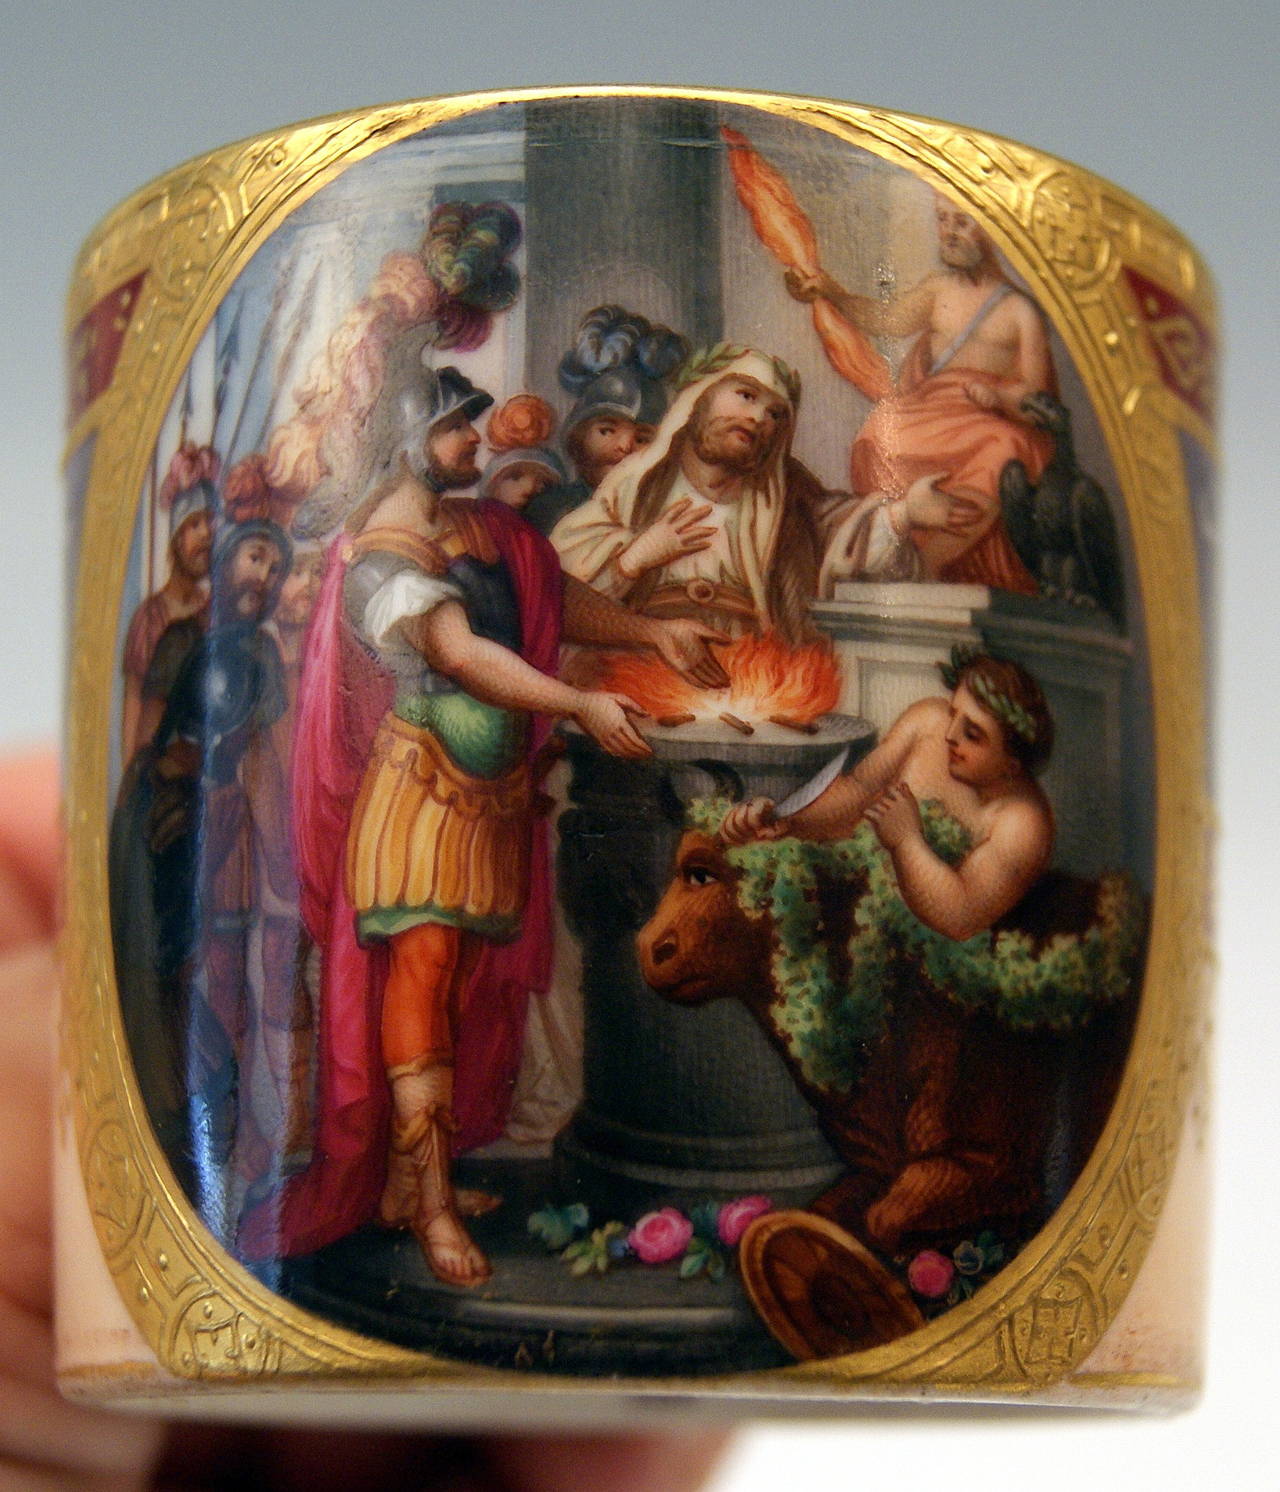 19th Century Imperial Porcelain Antique Mythology Cup and Saucer, Vienna, 1806-1815